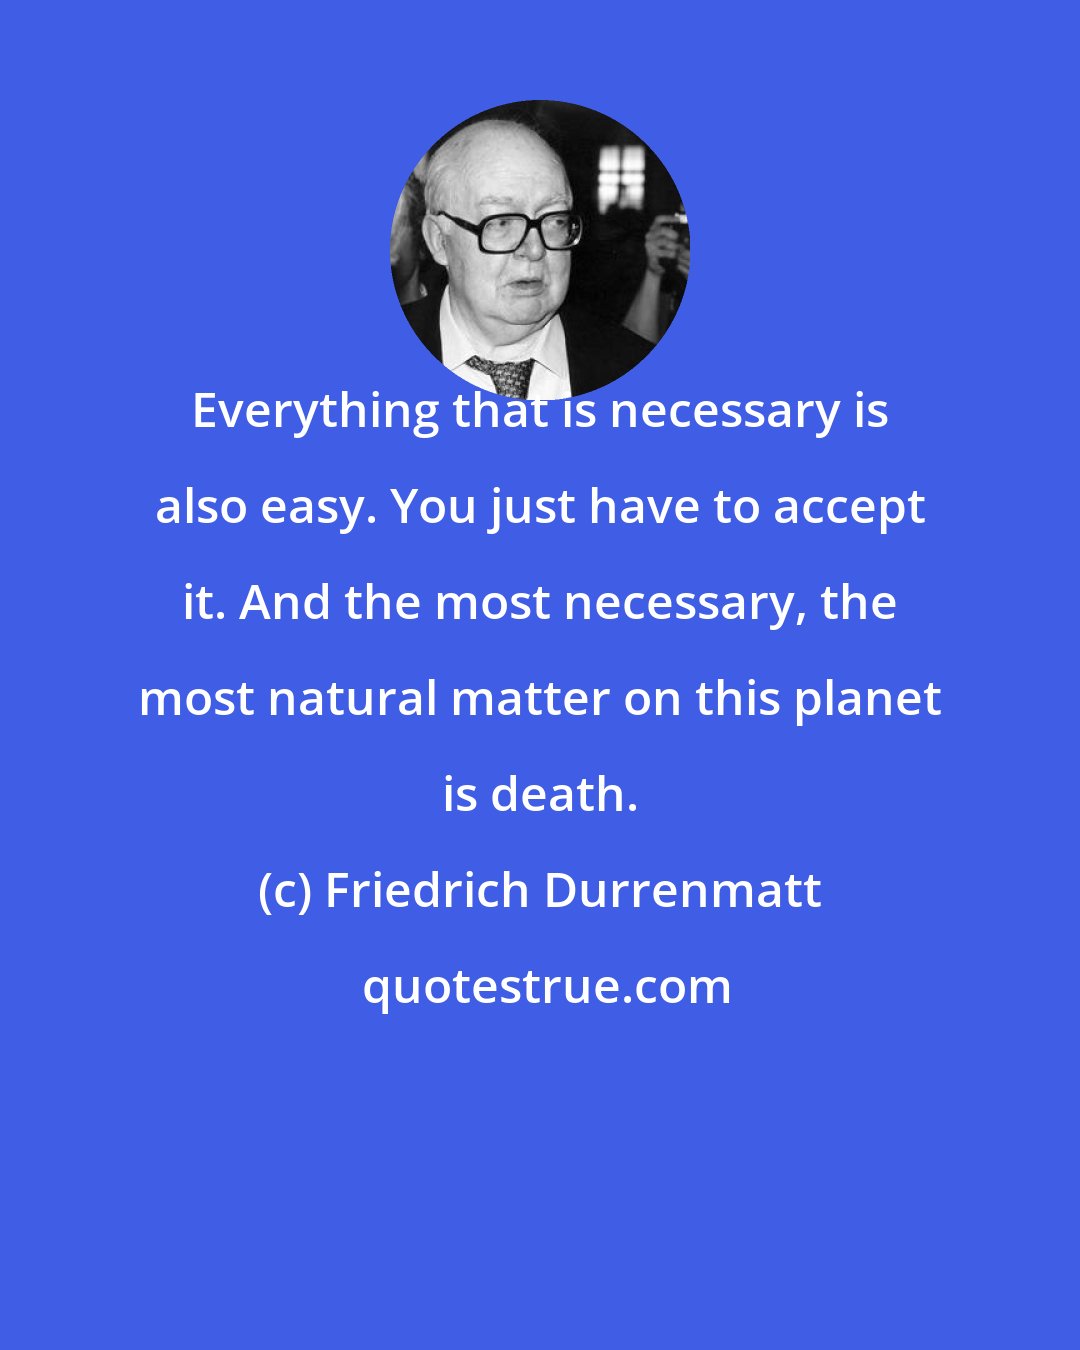 Friedrich Durrenmatt: Everything that is necessary is also easy. You just have to accept it. And the most necessary, the most natural matter on this planet is death.